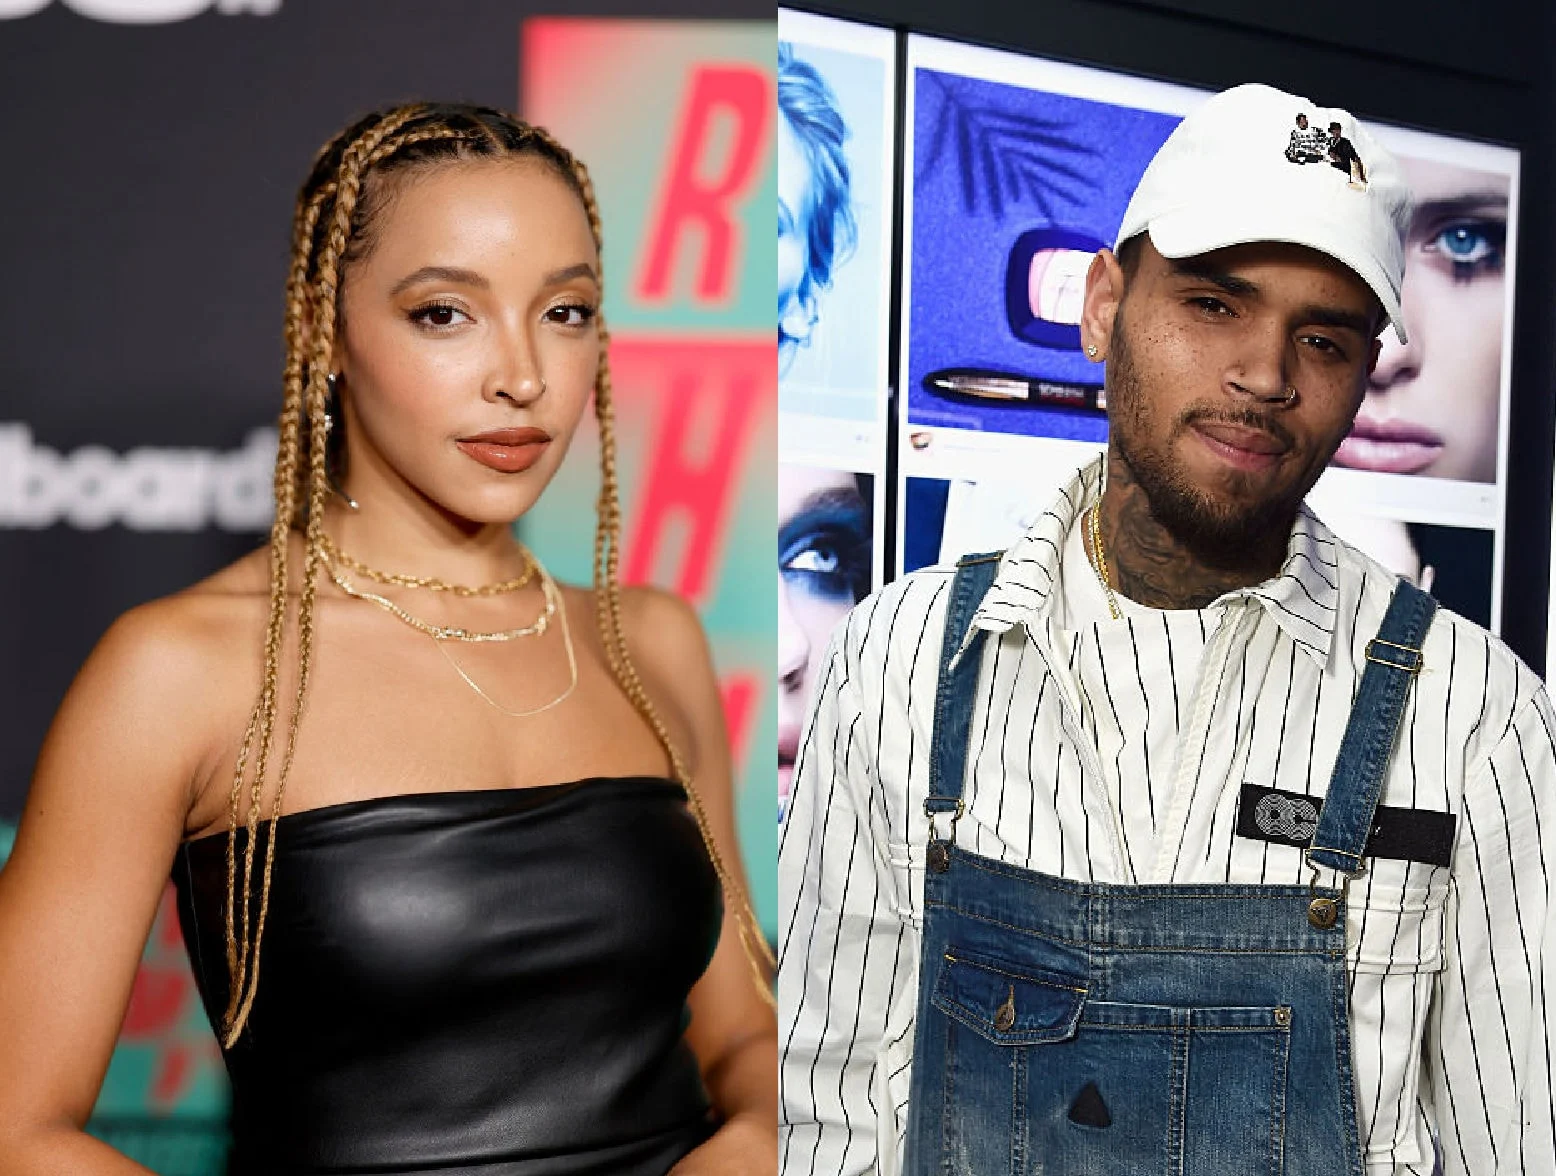 tinashe-responds-to-chris-browns-mean-tweets-and-considers-reconciliation